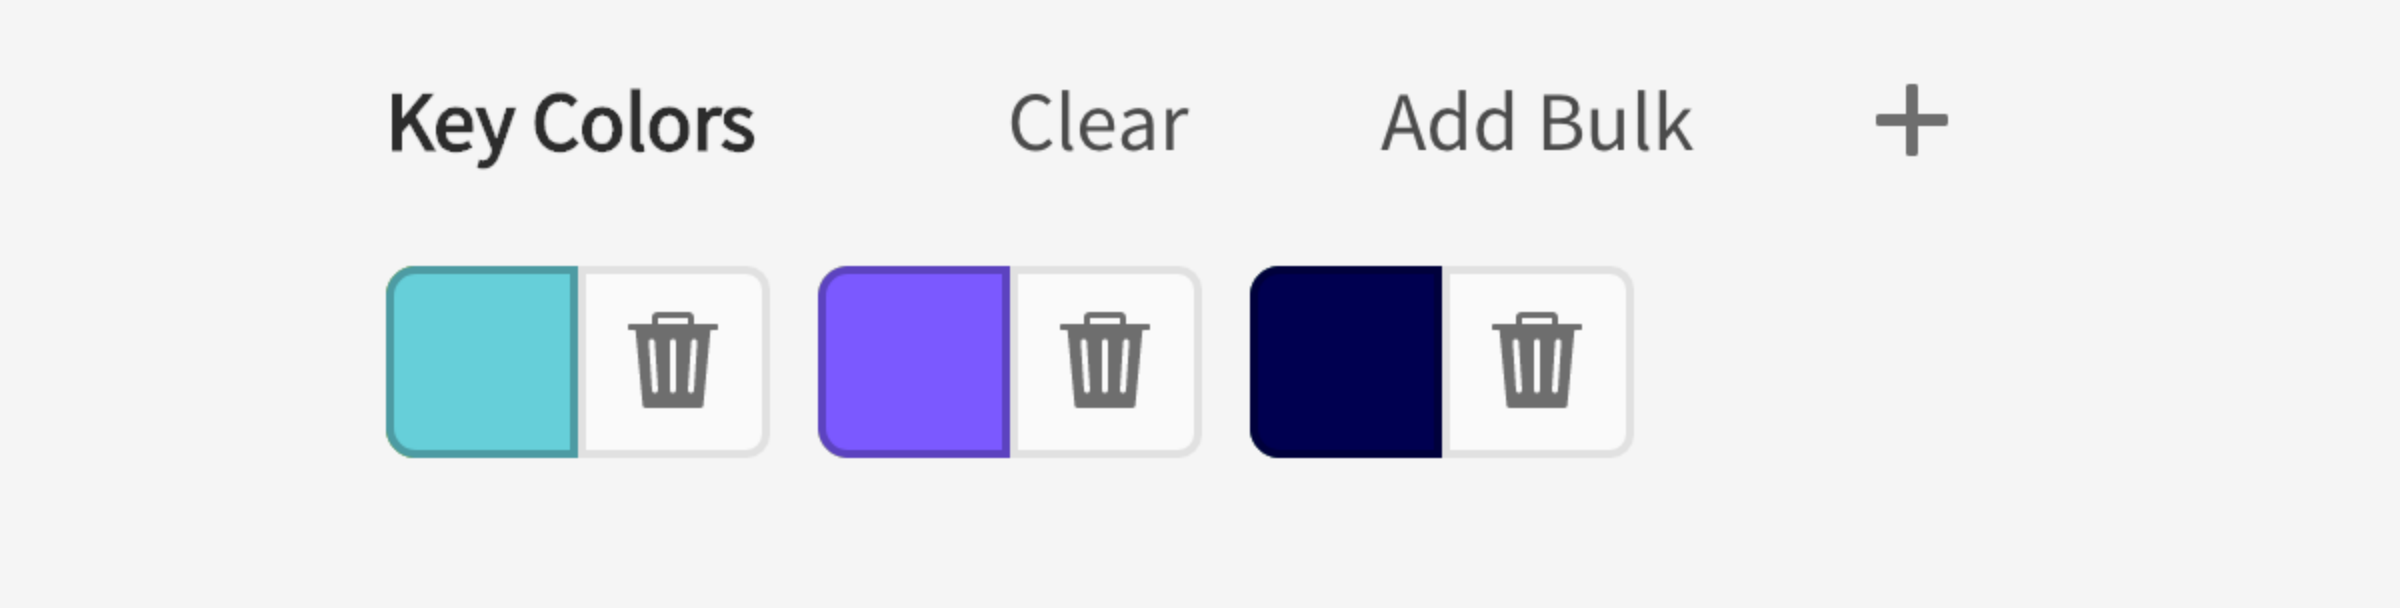 Input for key colors. Options clear, add bulk, add. Delete buttons next to key colors teal, purple, deep purple